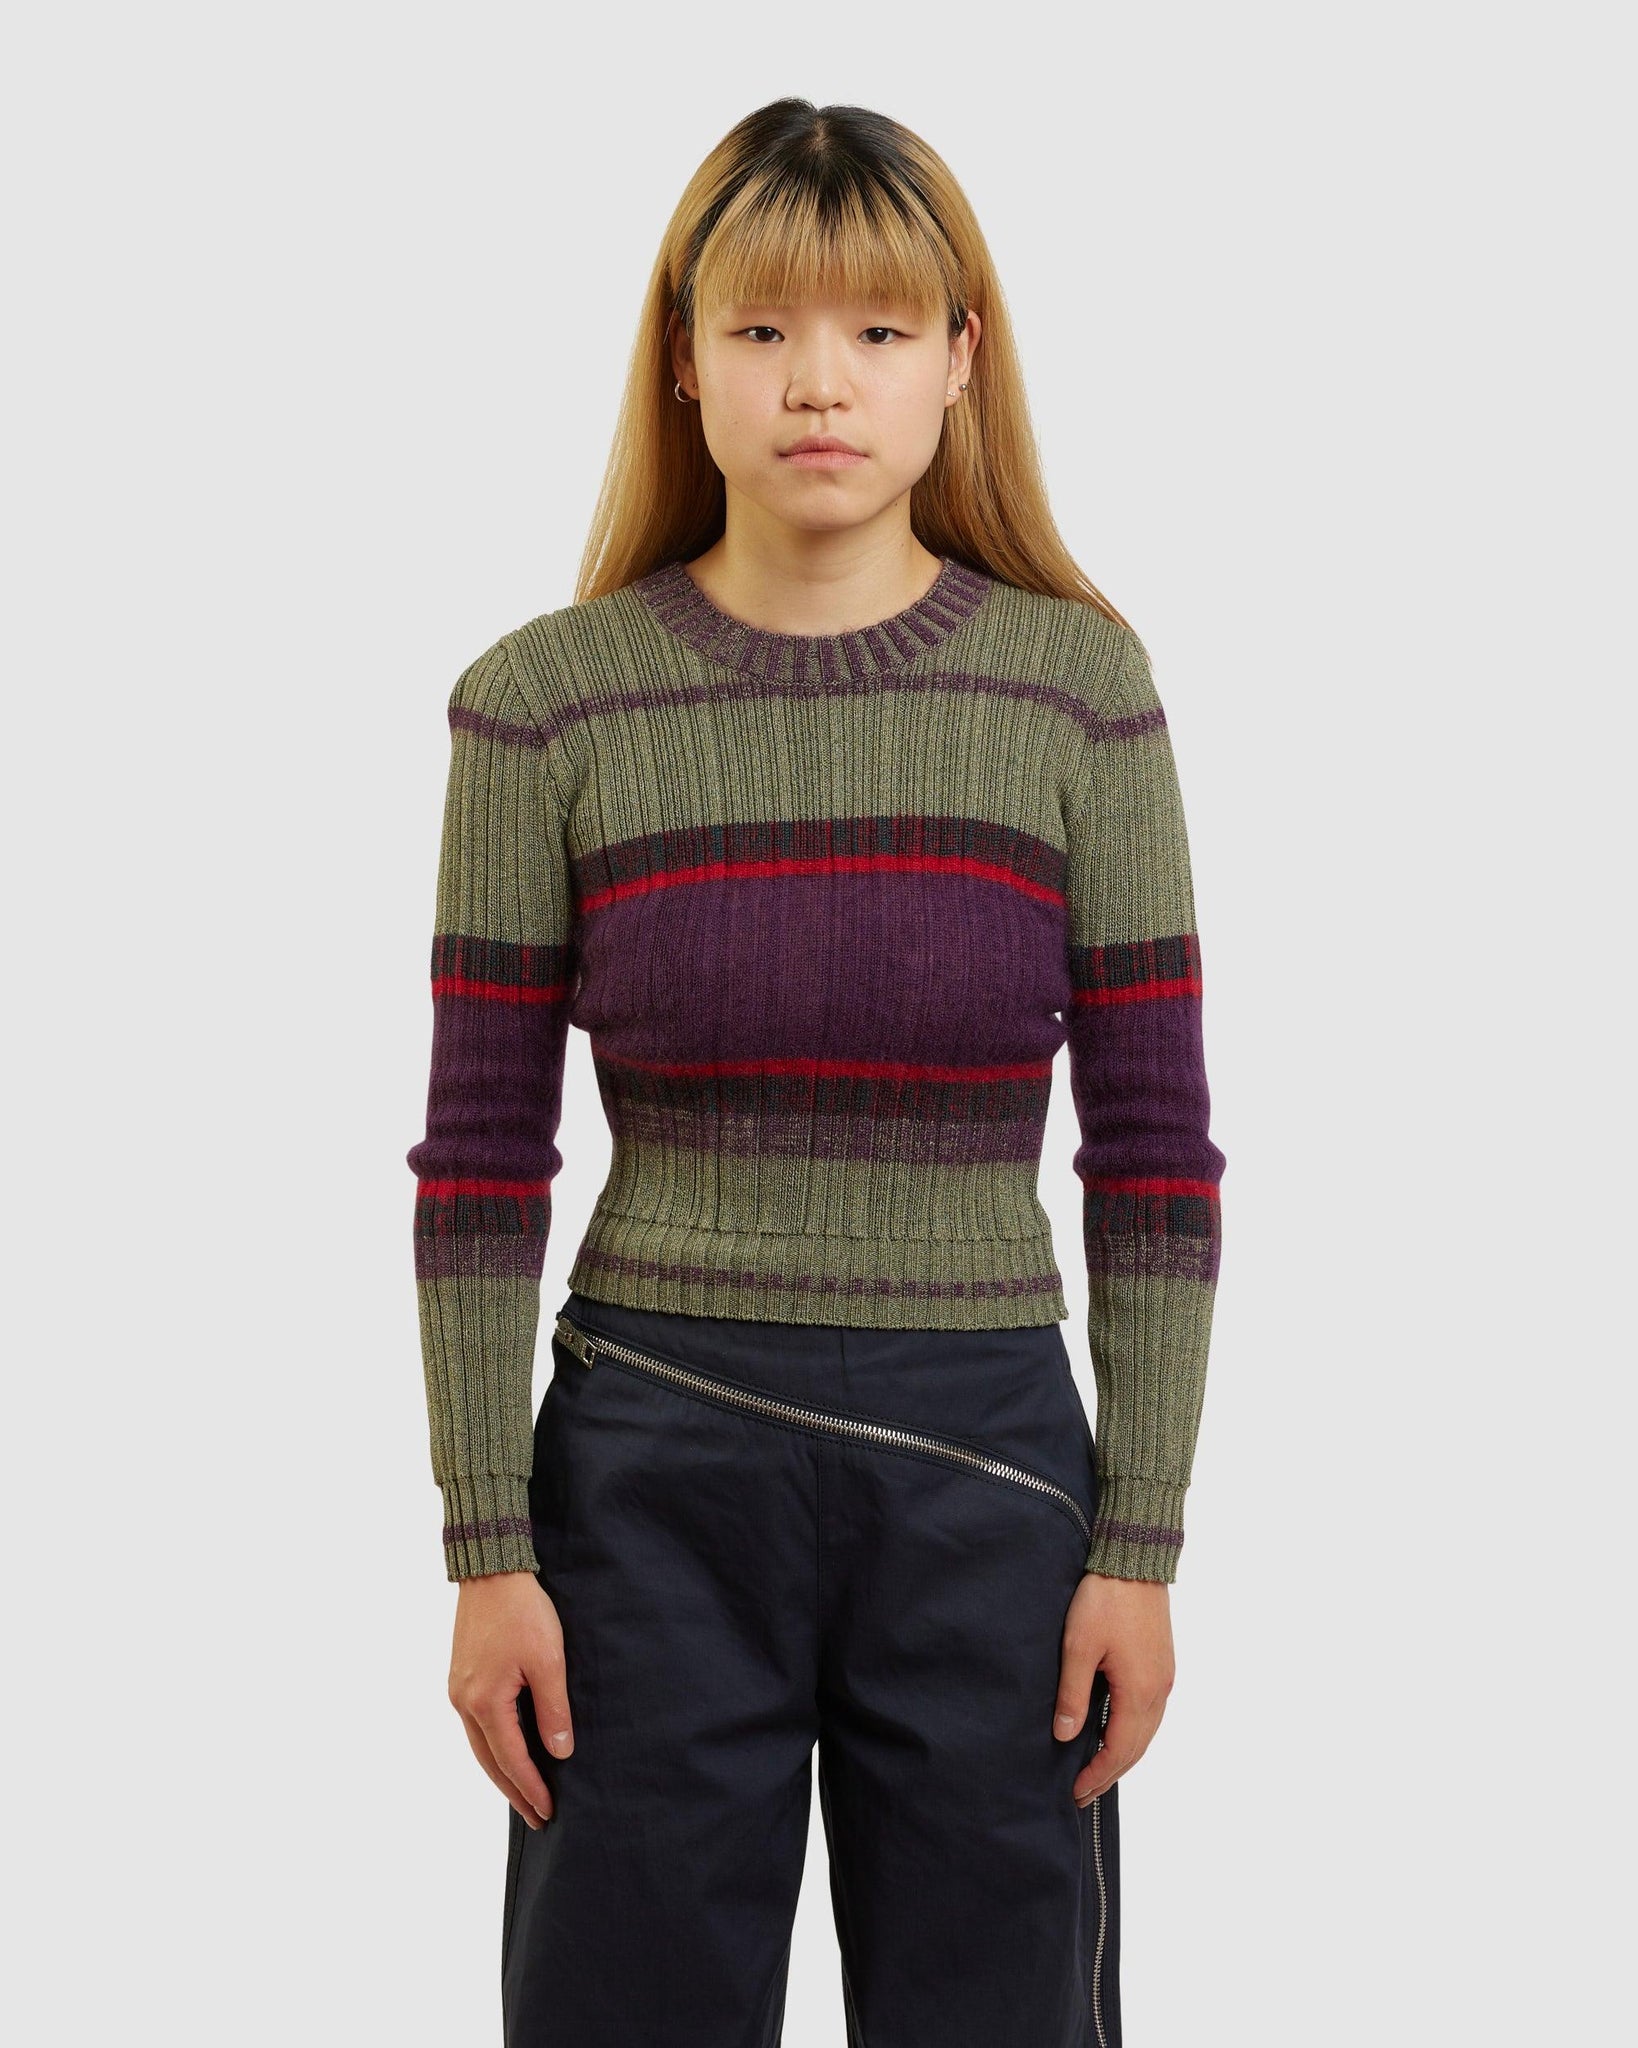 Designer Knit - {{ collection.title }} - Chinatown Country Club 